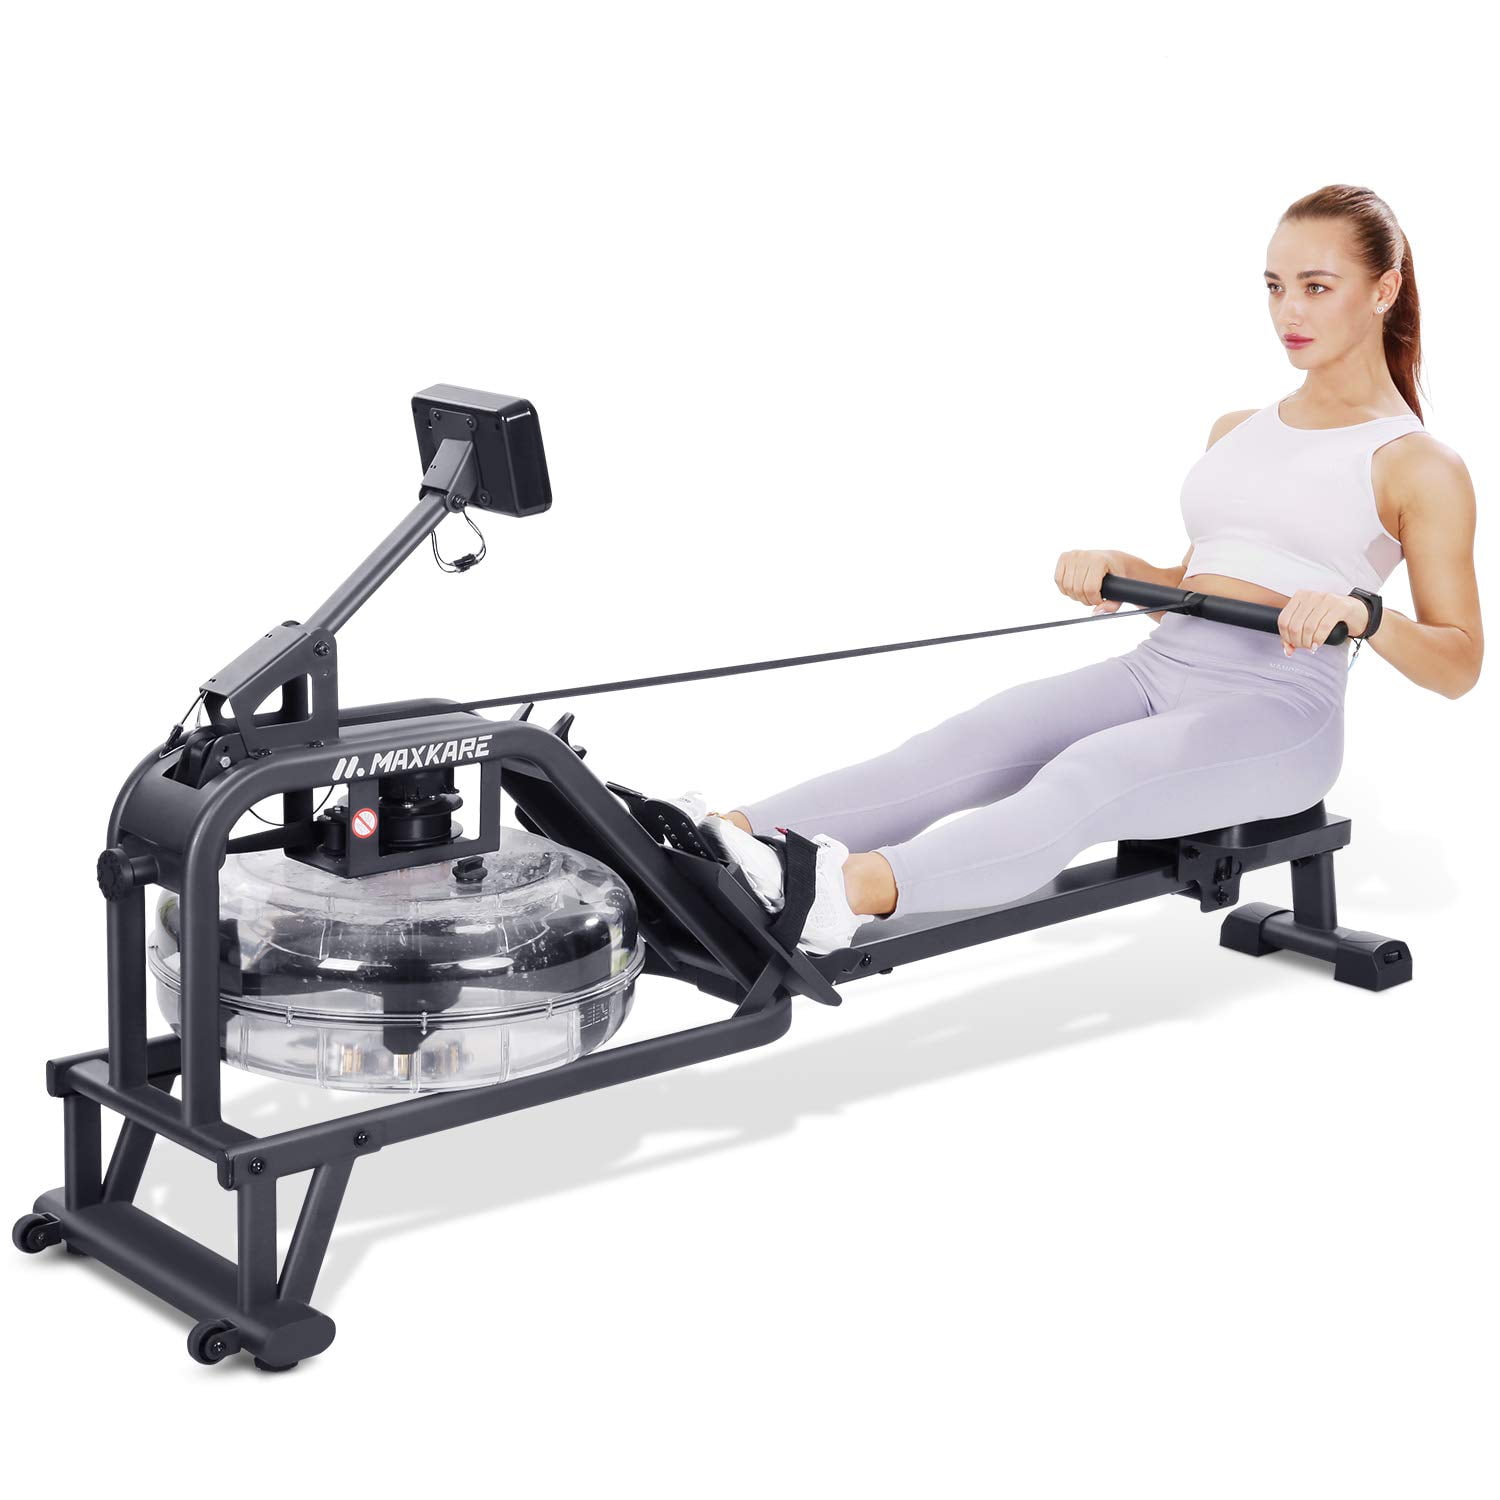 Water Rower Rowing Machines for Home use 330Lbs Weight Capacity Row Machines 